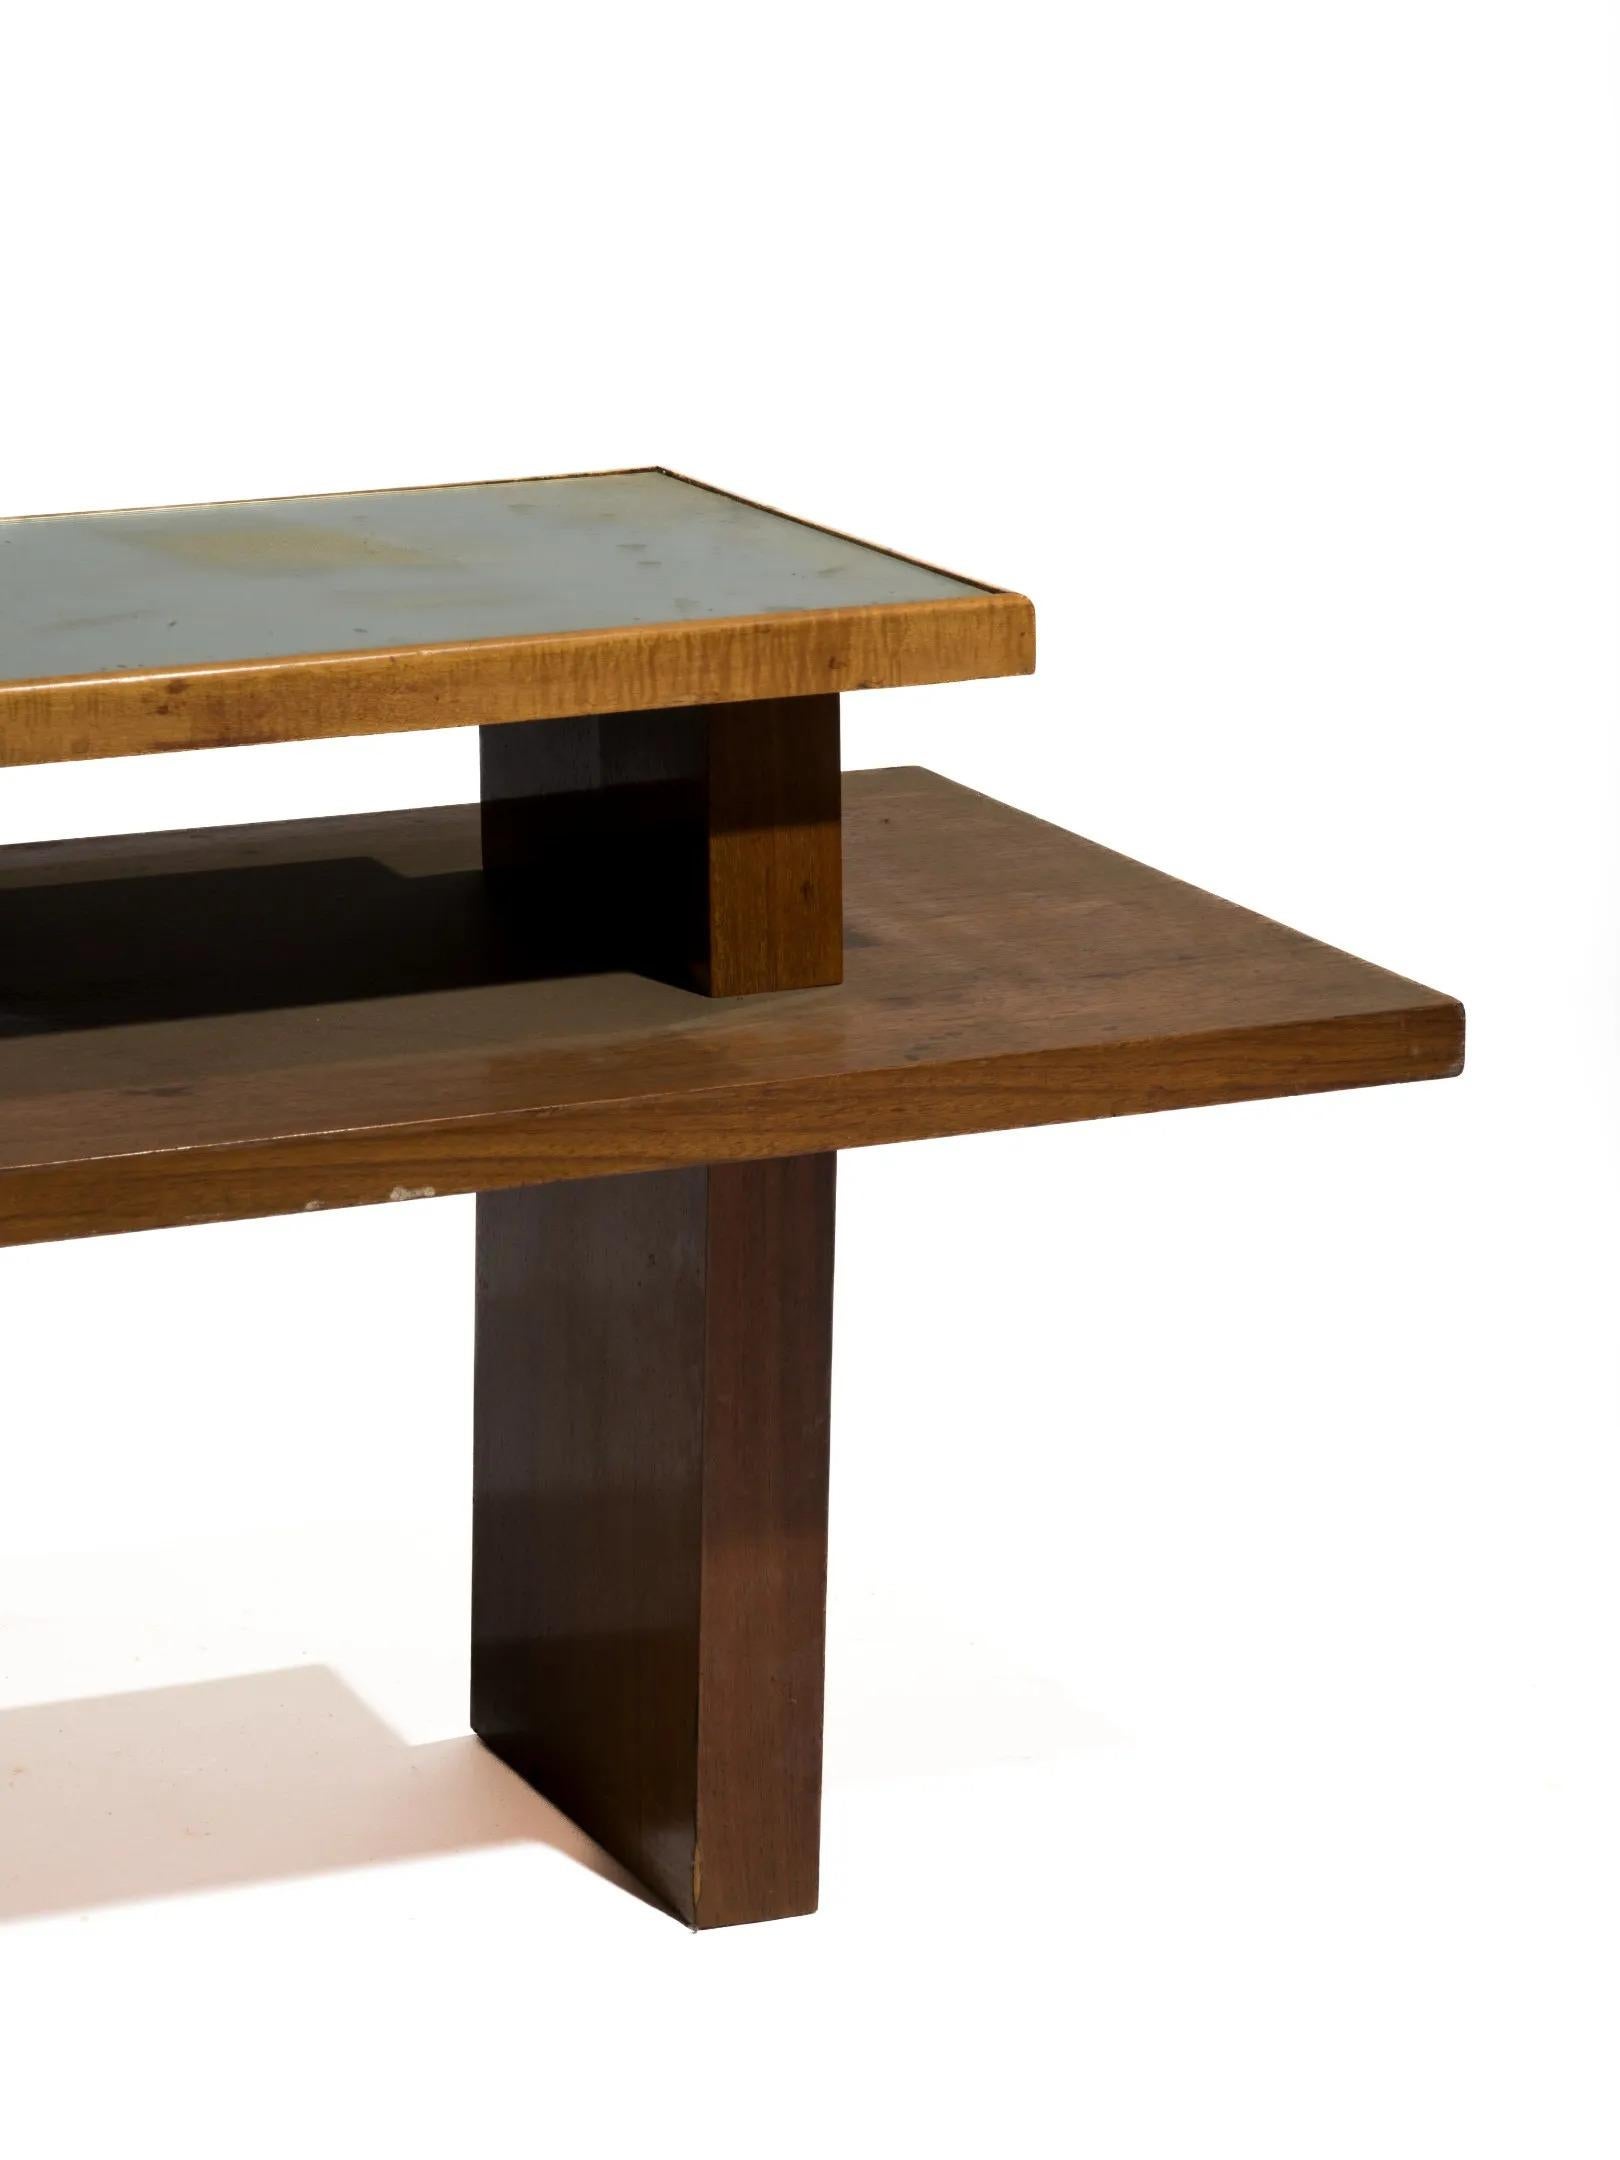 Modernist art deco pedestal table with two trays, circa 1930
the upper tray is mirror-bottomed